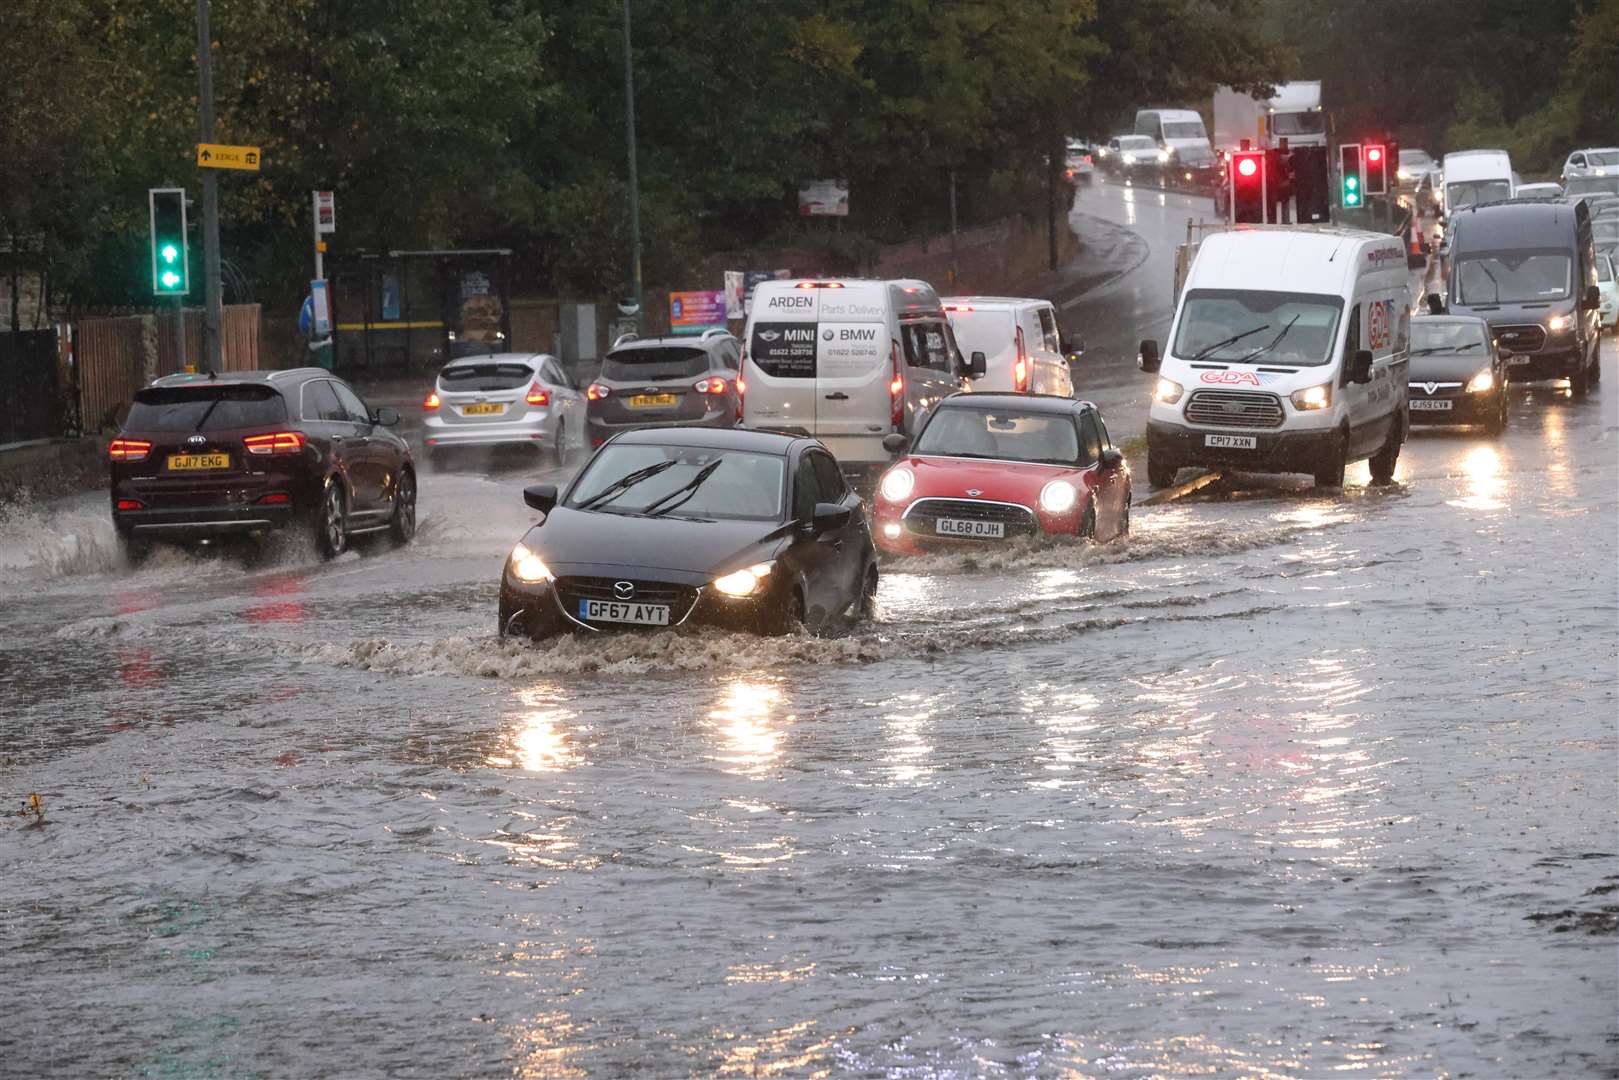 Flooding in London Road, Aylesford at the start of November. Picture: UKNIP.